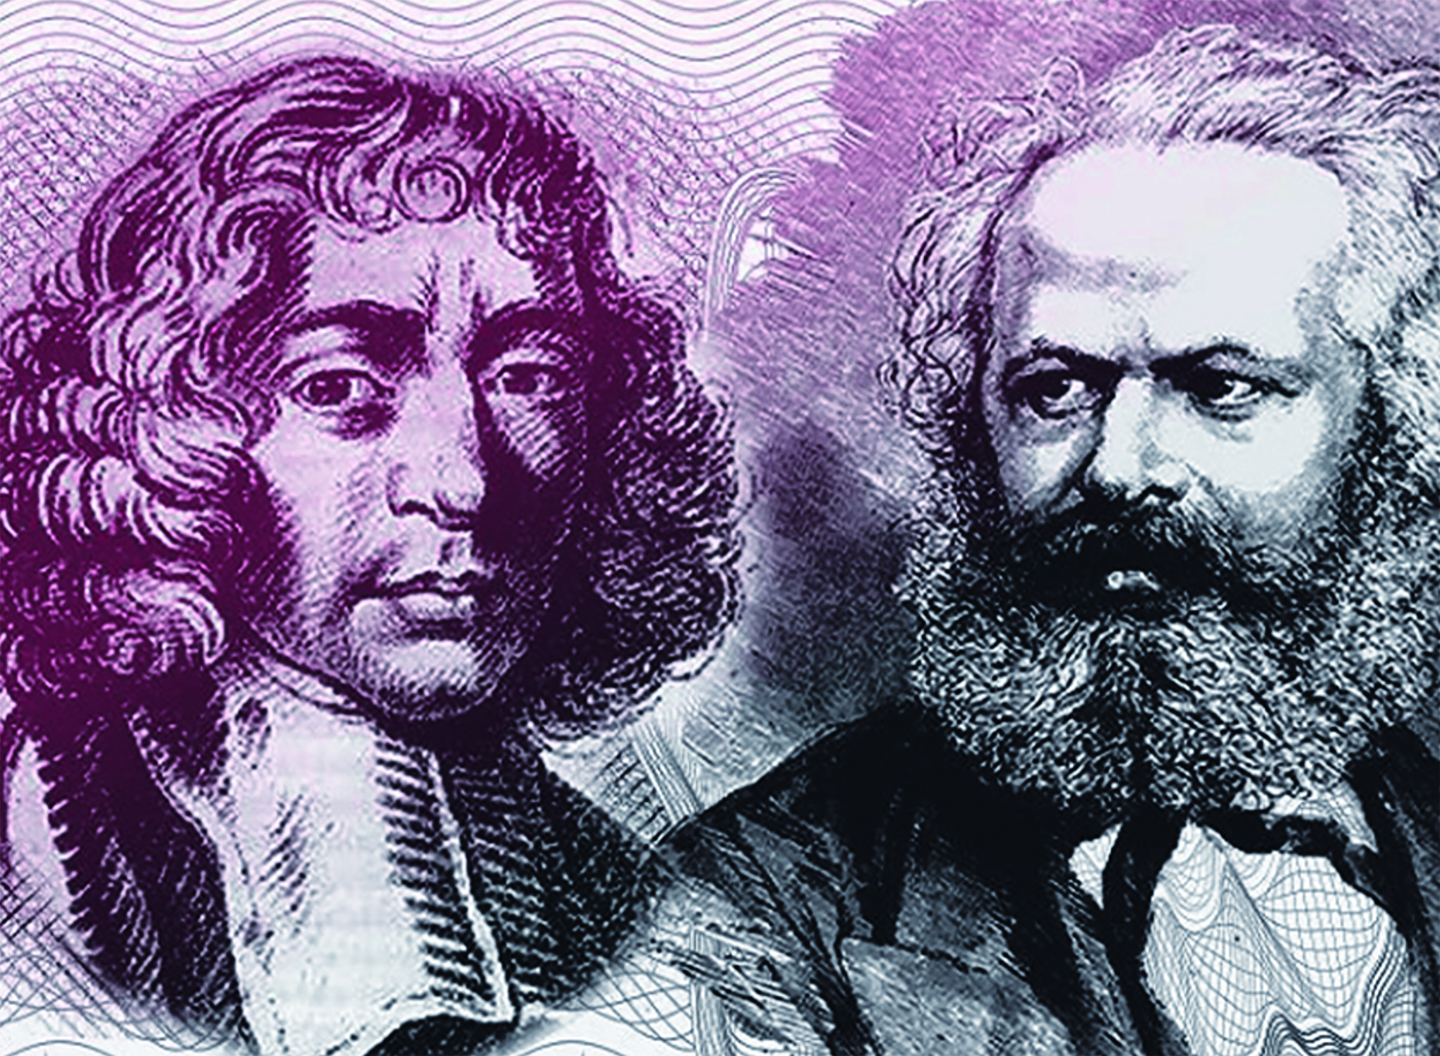 A coloured picture (the colours are mainly black, white, grey and purple) depicting a portrait sketching of Karl Marx and Baruch Spinoza side by side. Marx is on the right hand side looking towards the left and Spinoza is on the left hand side looking ahead and to the left.